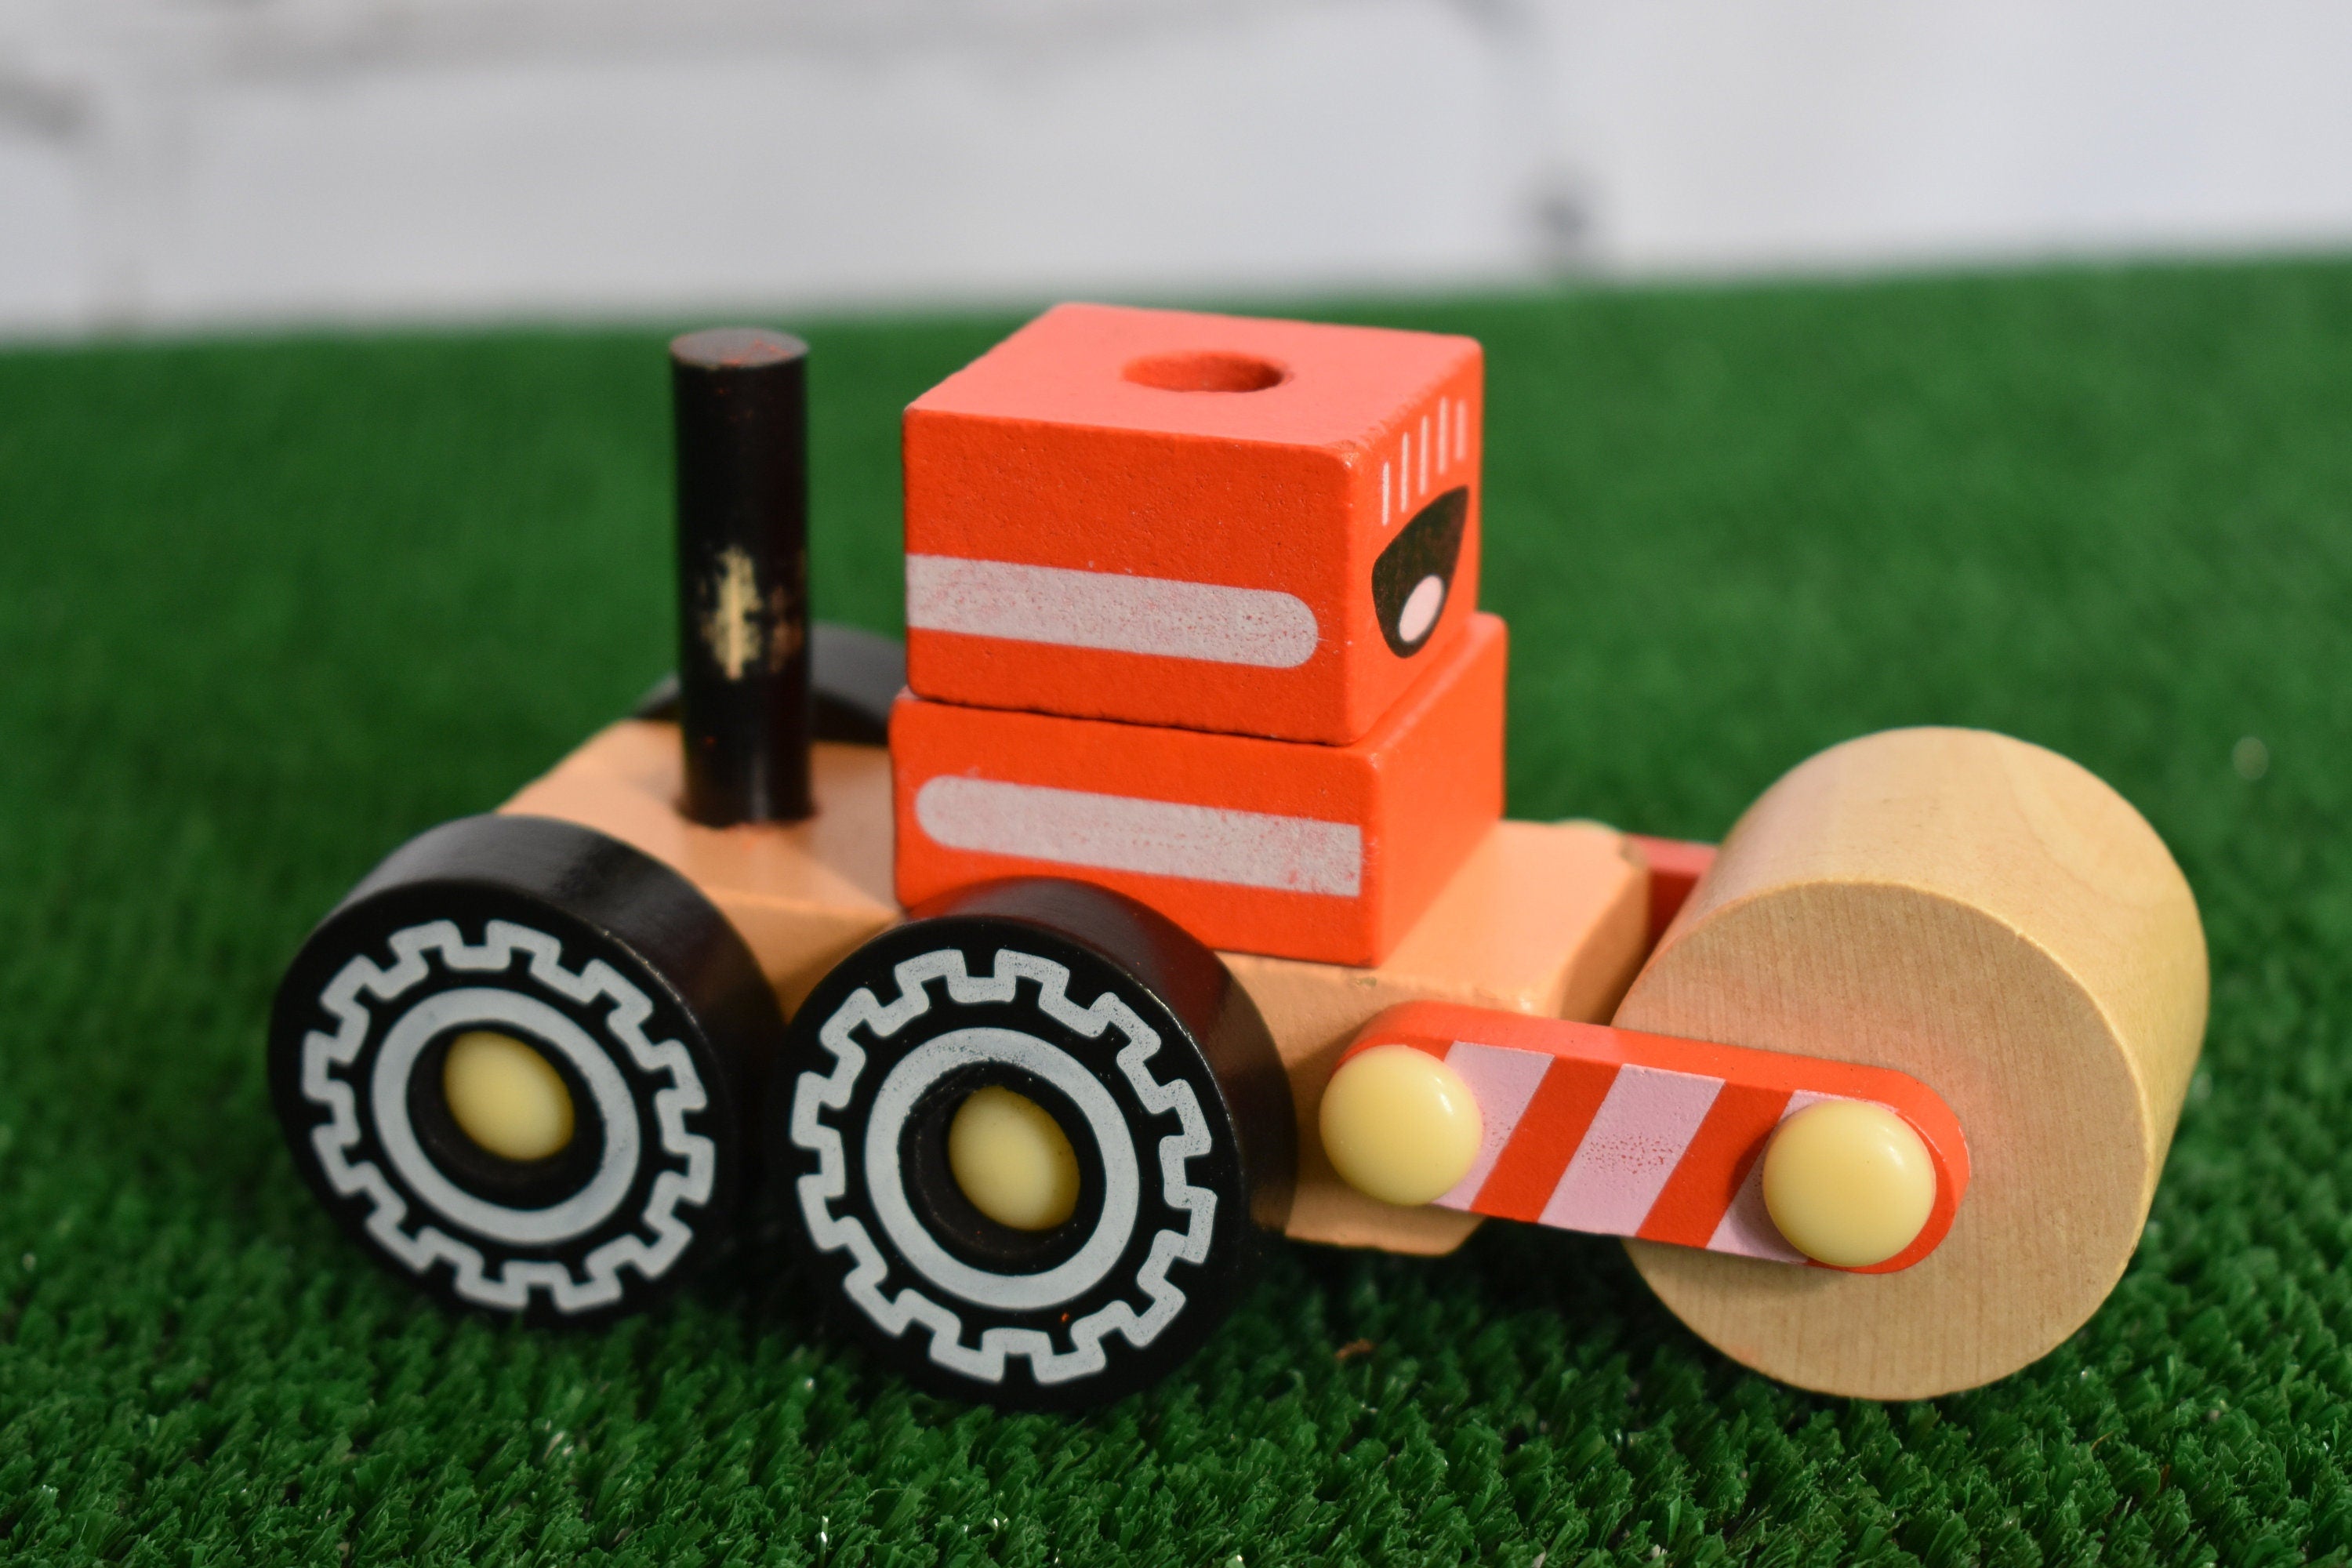 Child-Safe Artistic Handmade Construction Vehicle Toddler Wooden Push Toy / Toddler Gift / Return Gifts